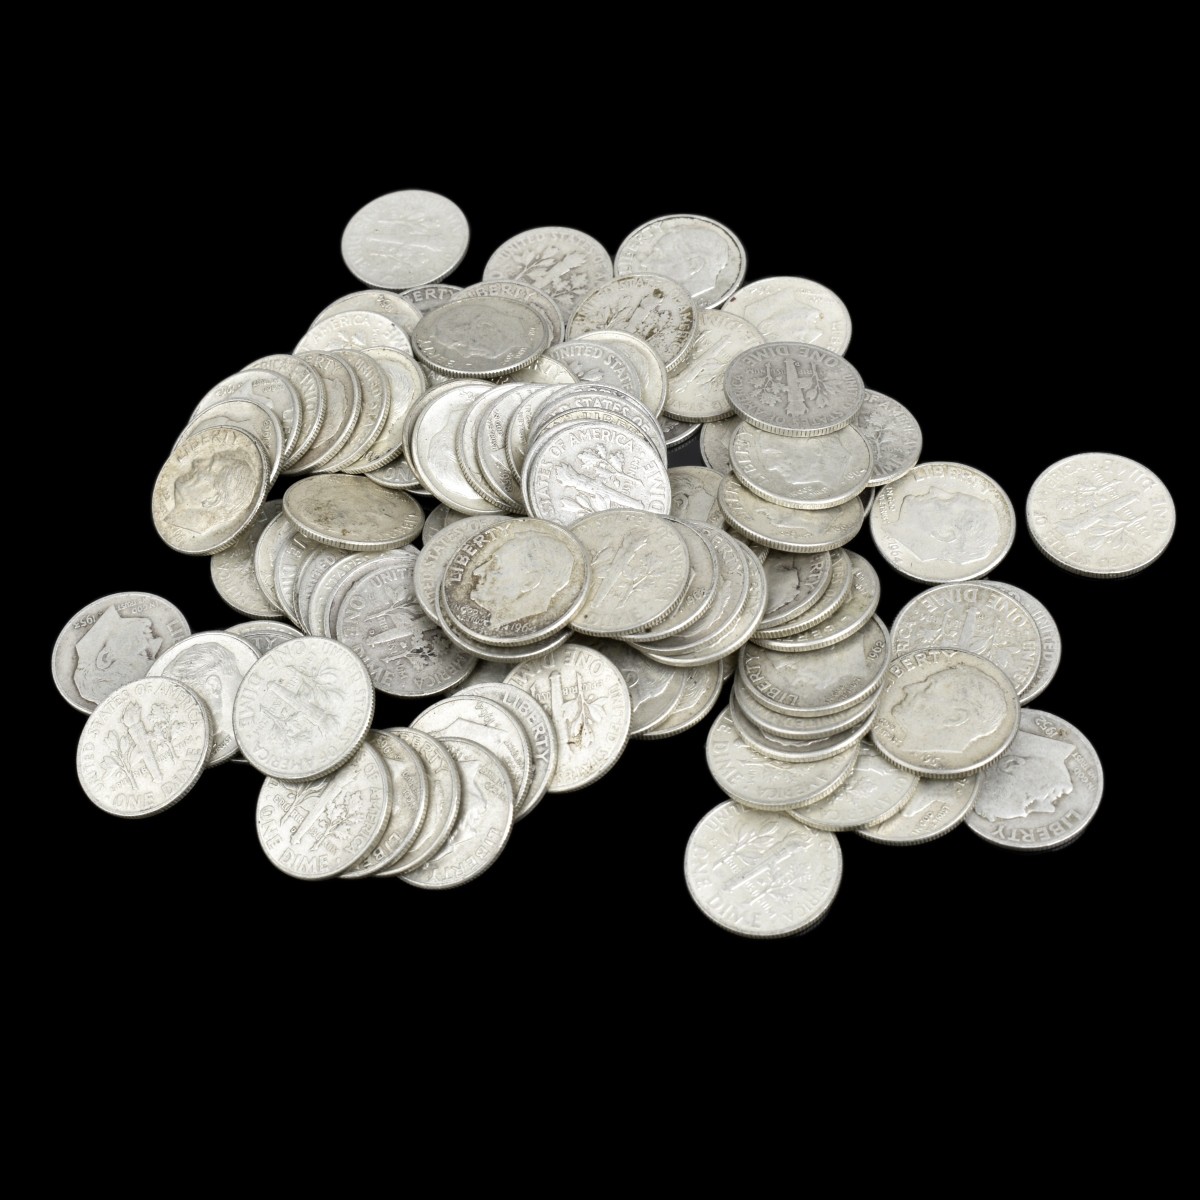 One Hundred U.S. Silver Dimes